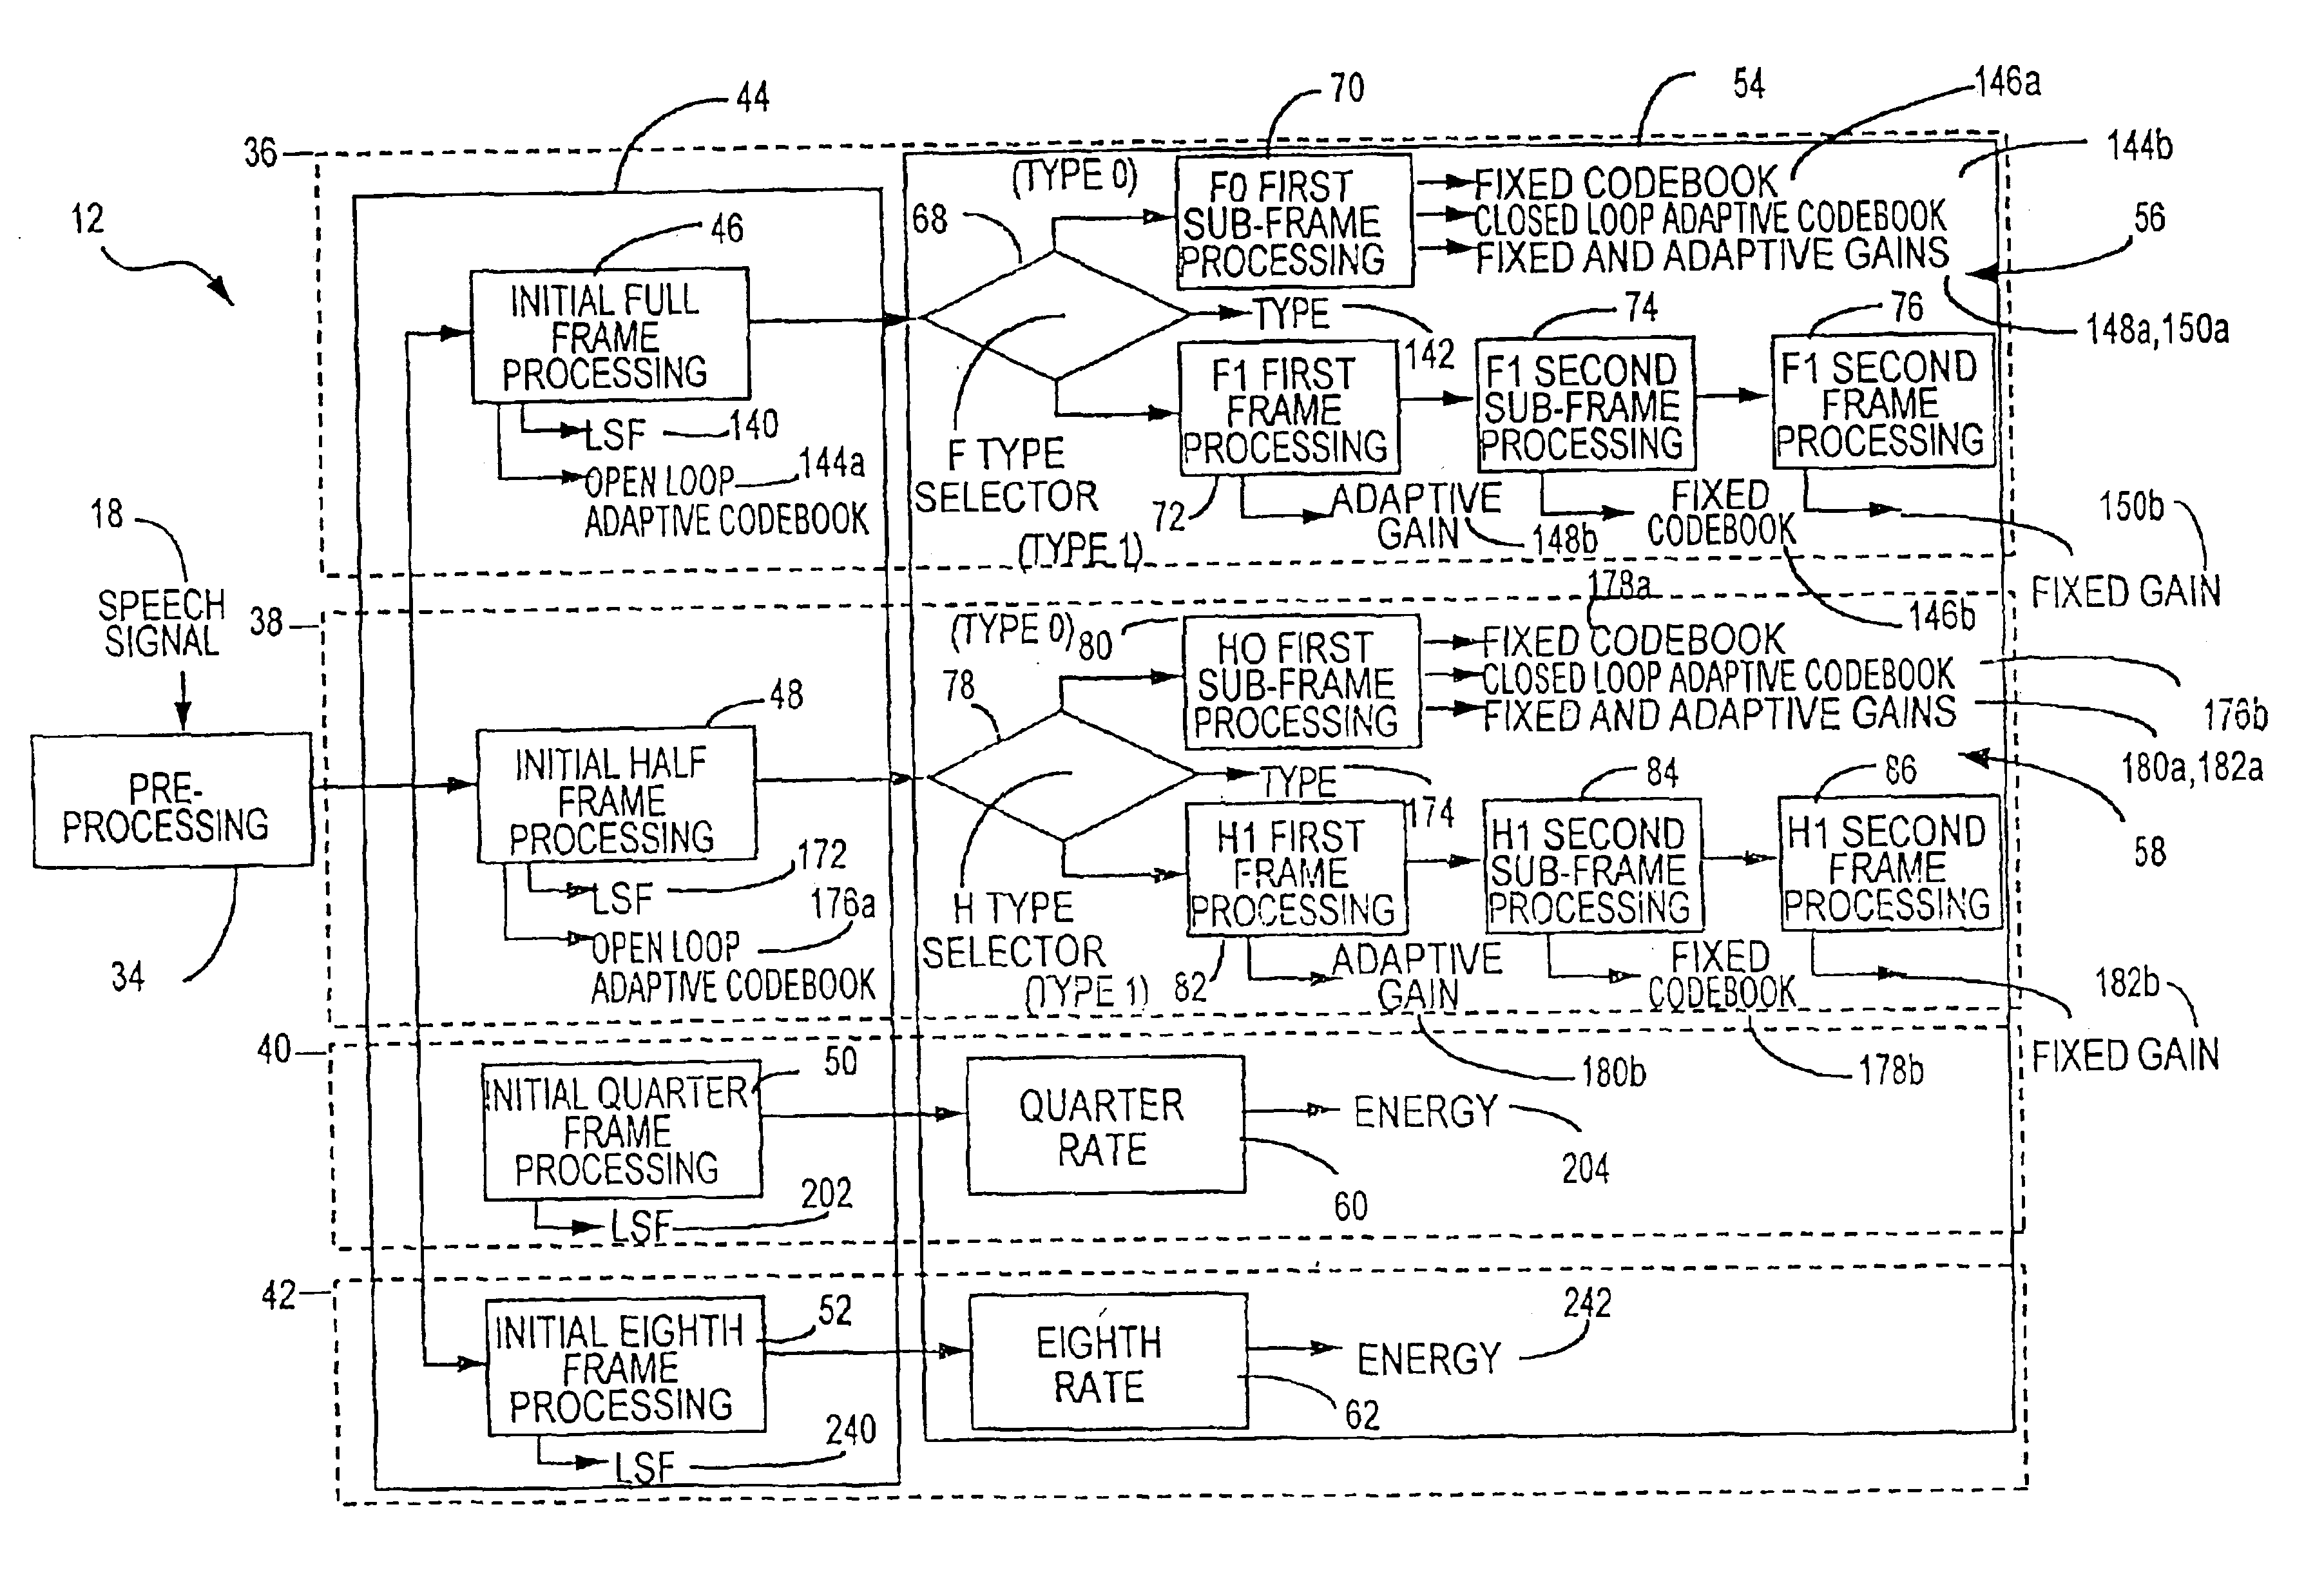 Multi-mode bitstream transmission protocol of encoded voice signals with embeded characteristics